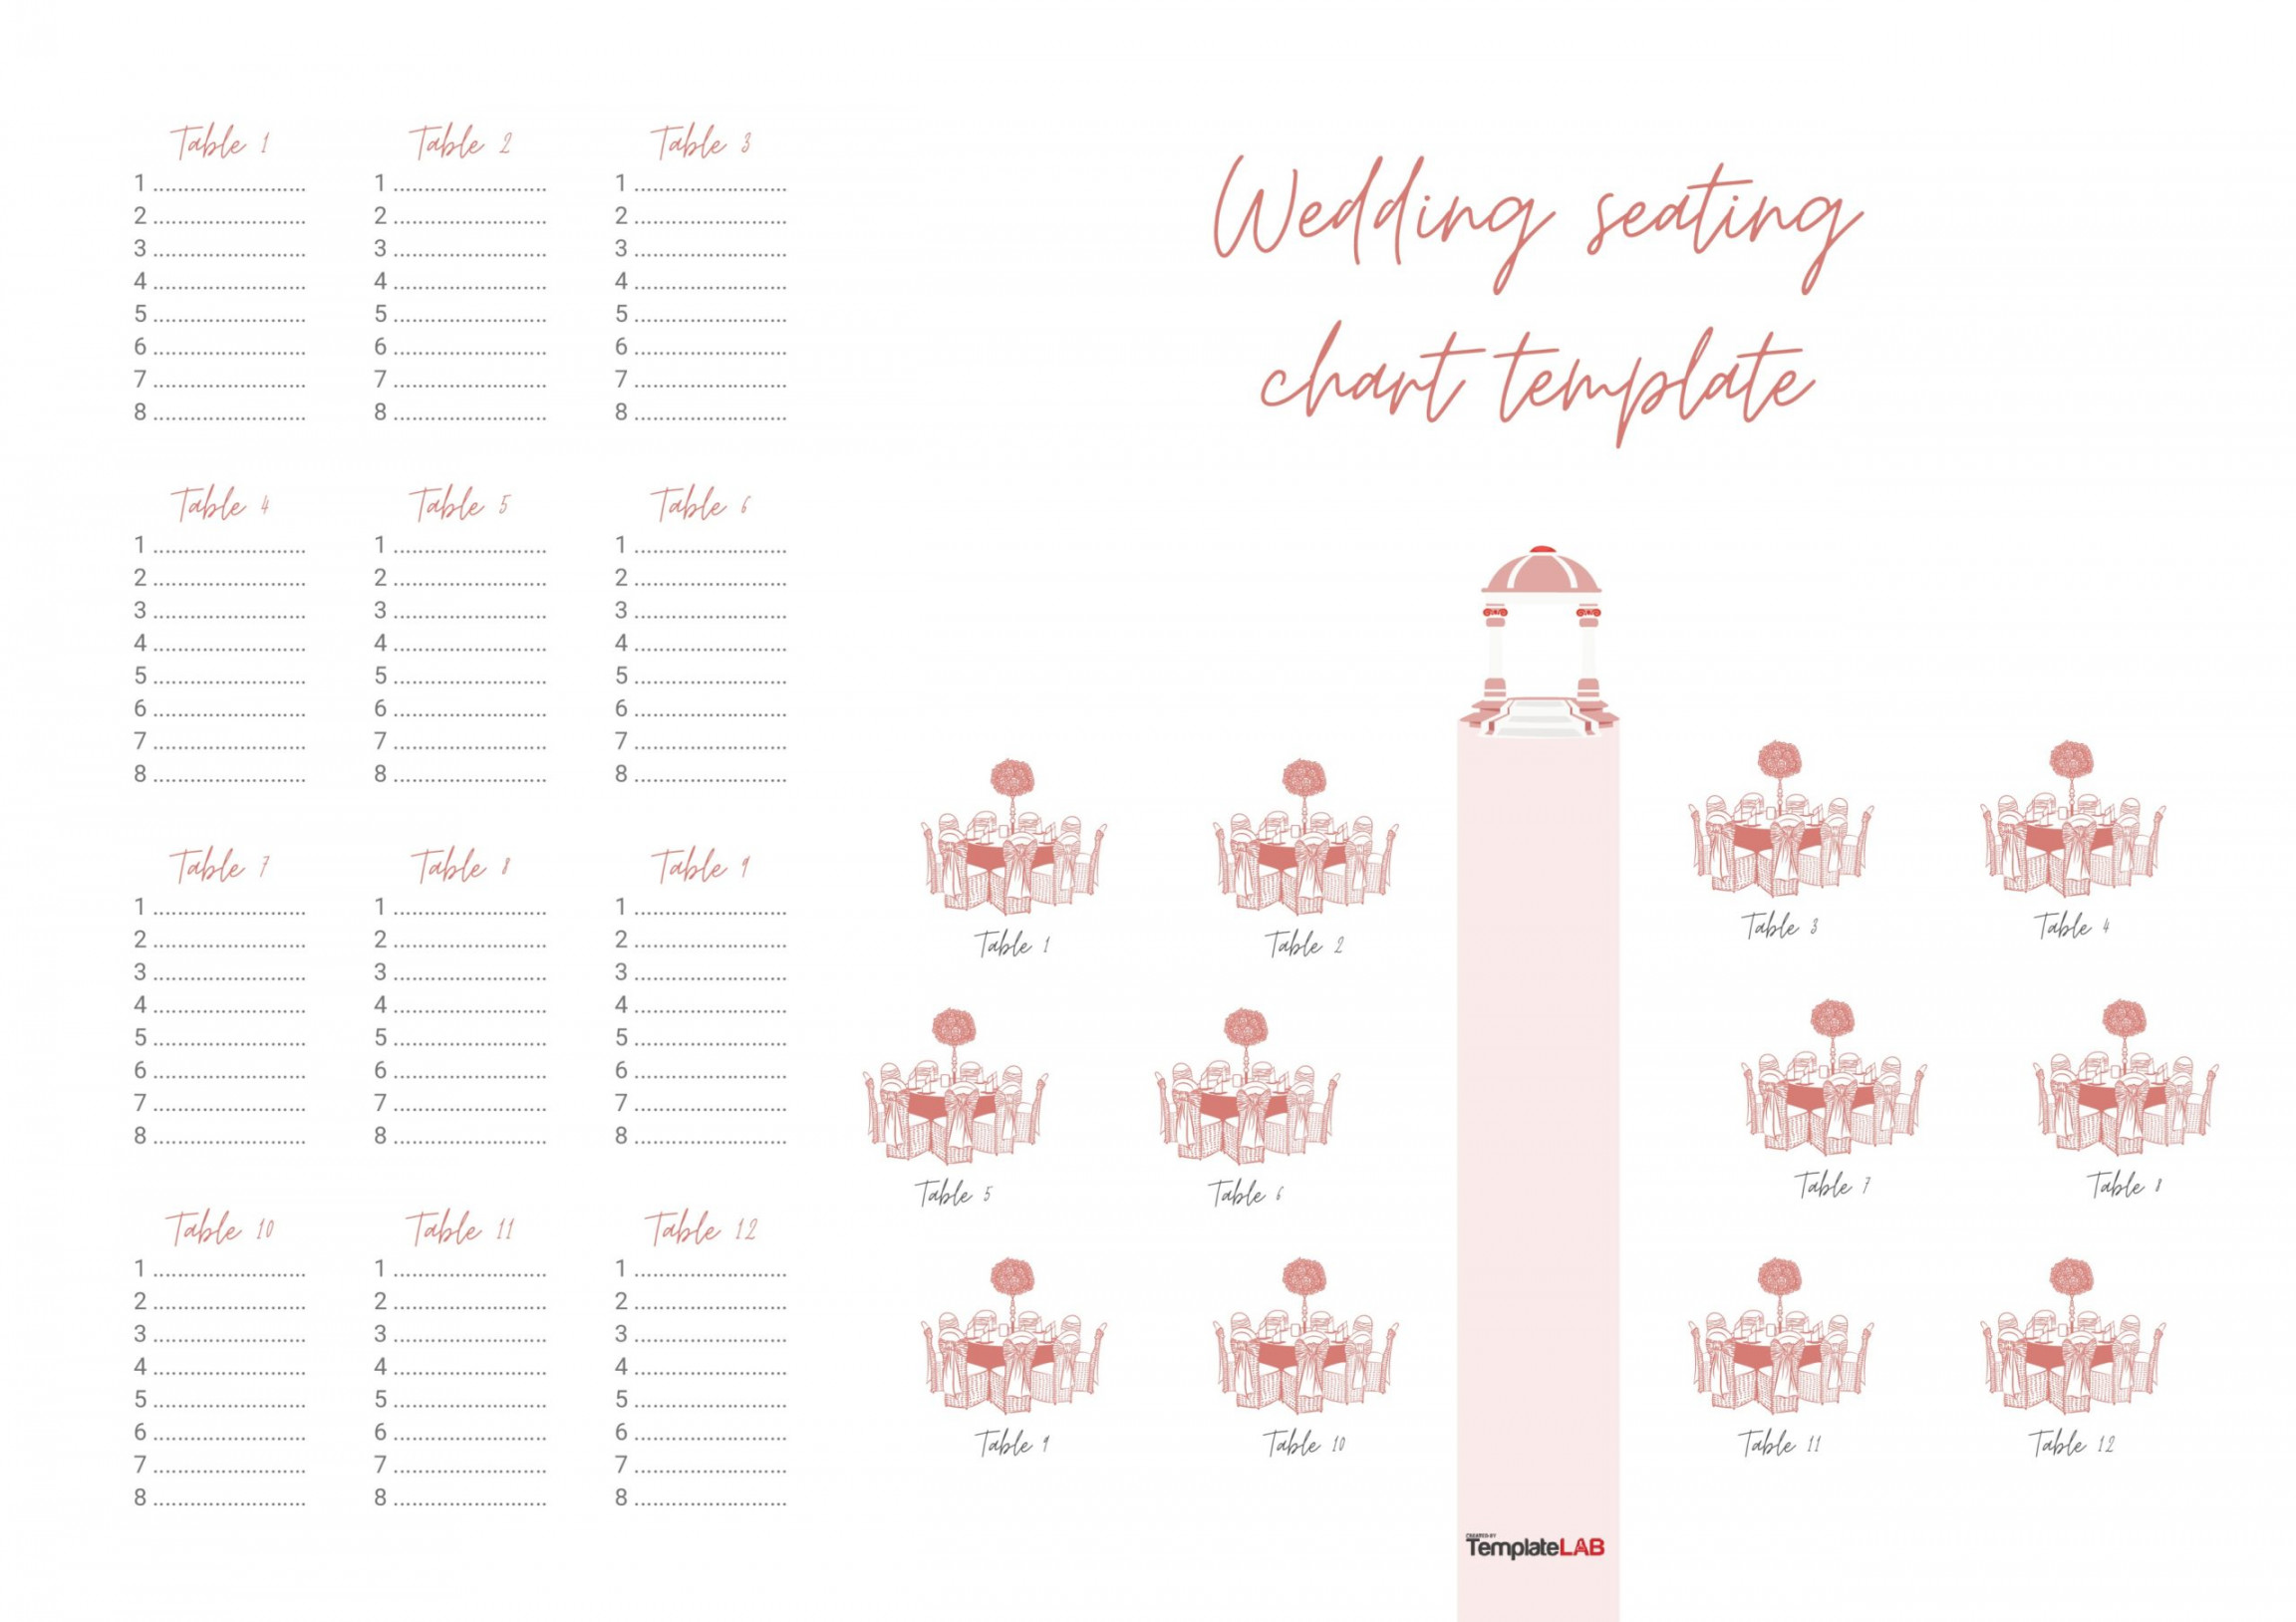 Great Seating Chart Templates (Wedding, Classroom + more)